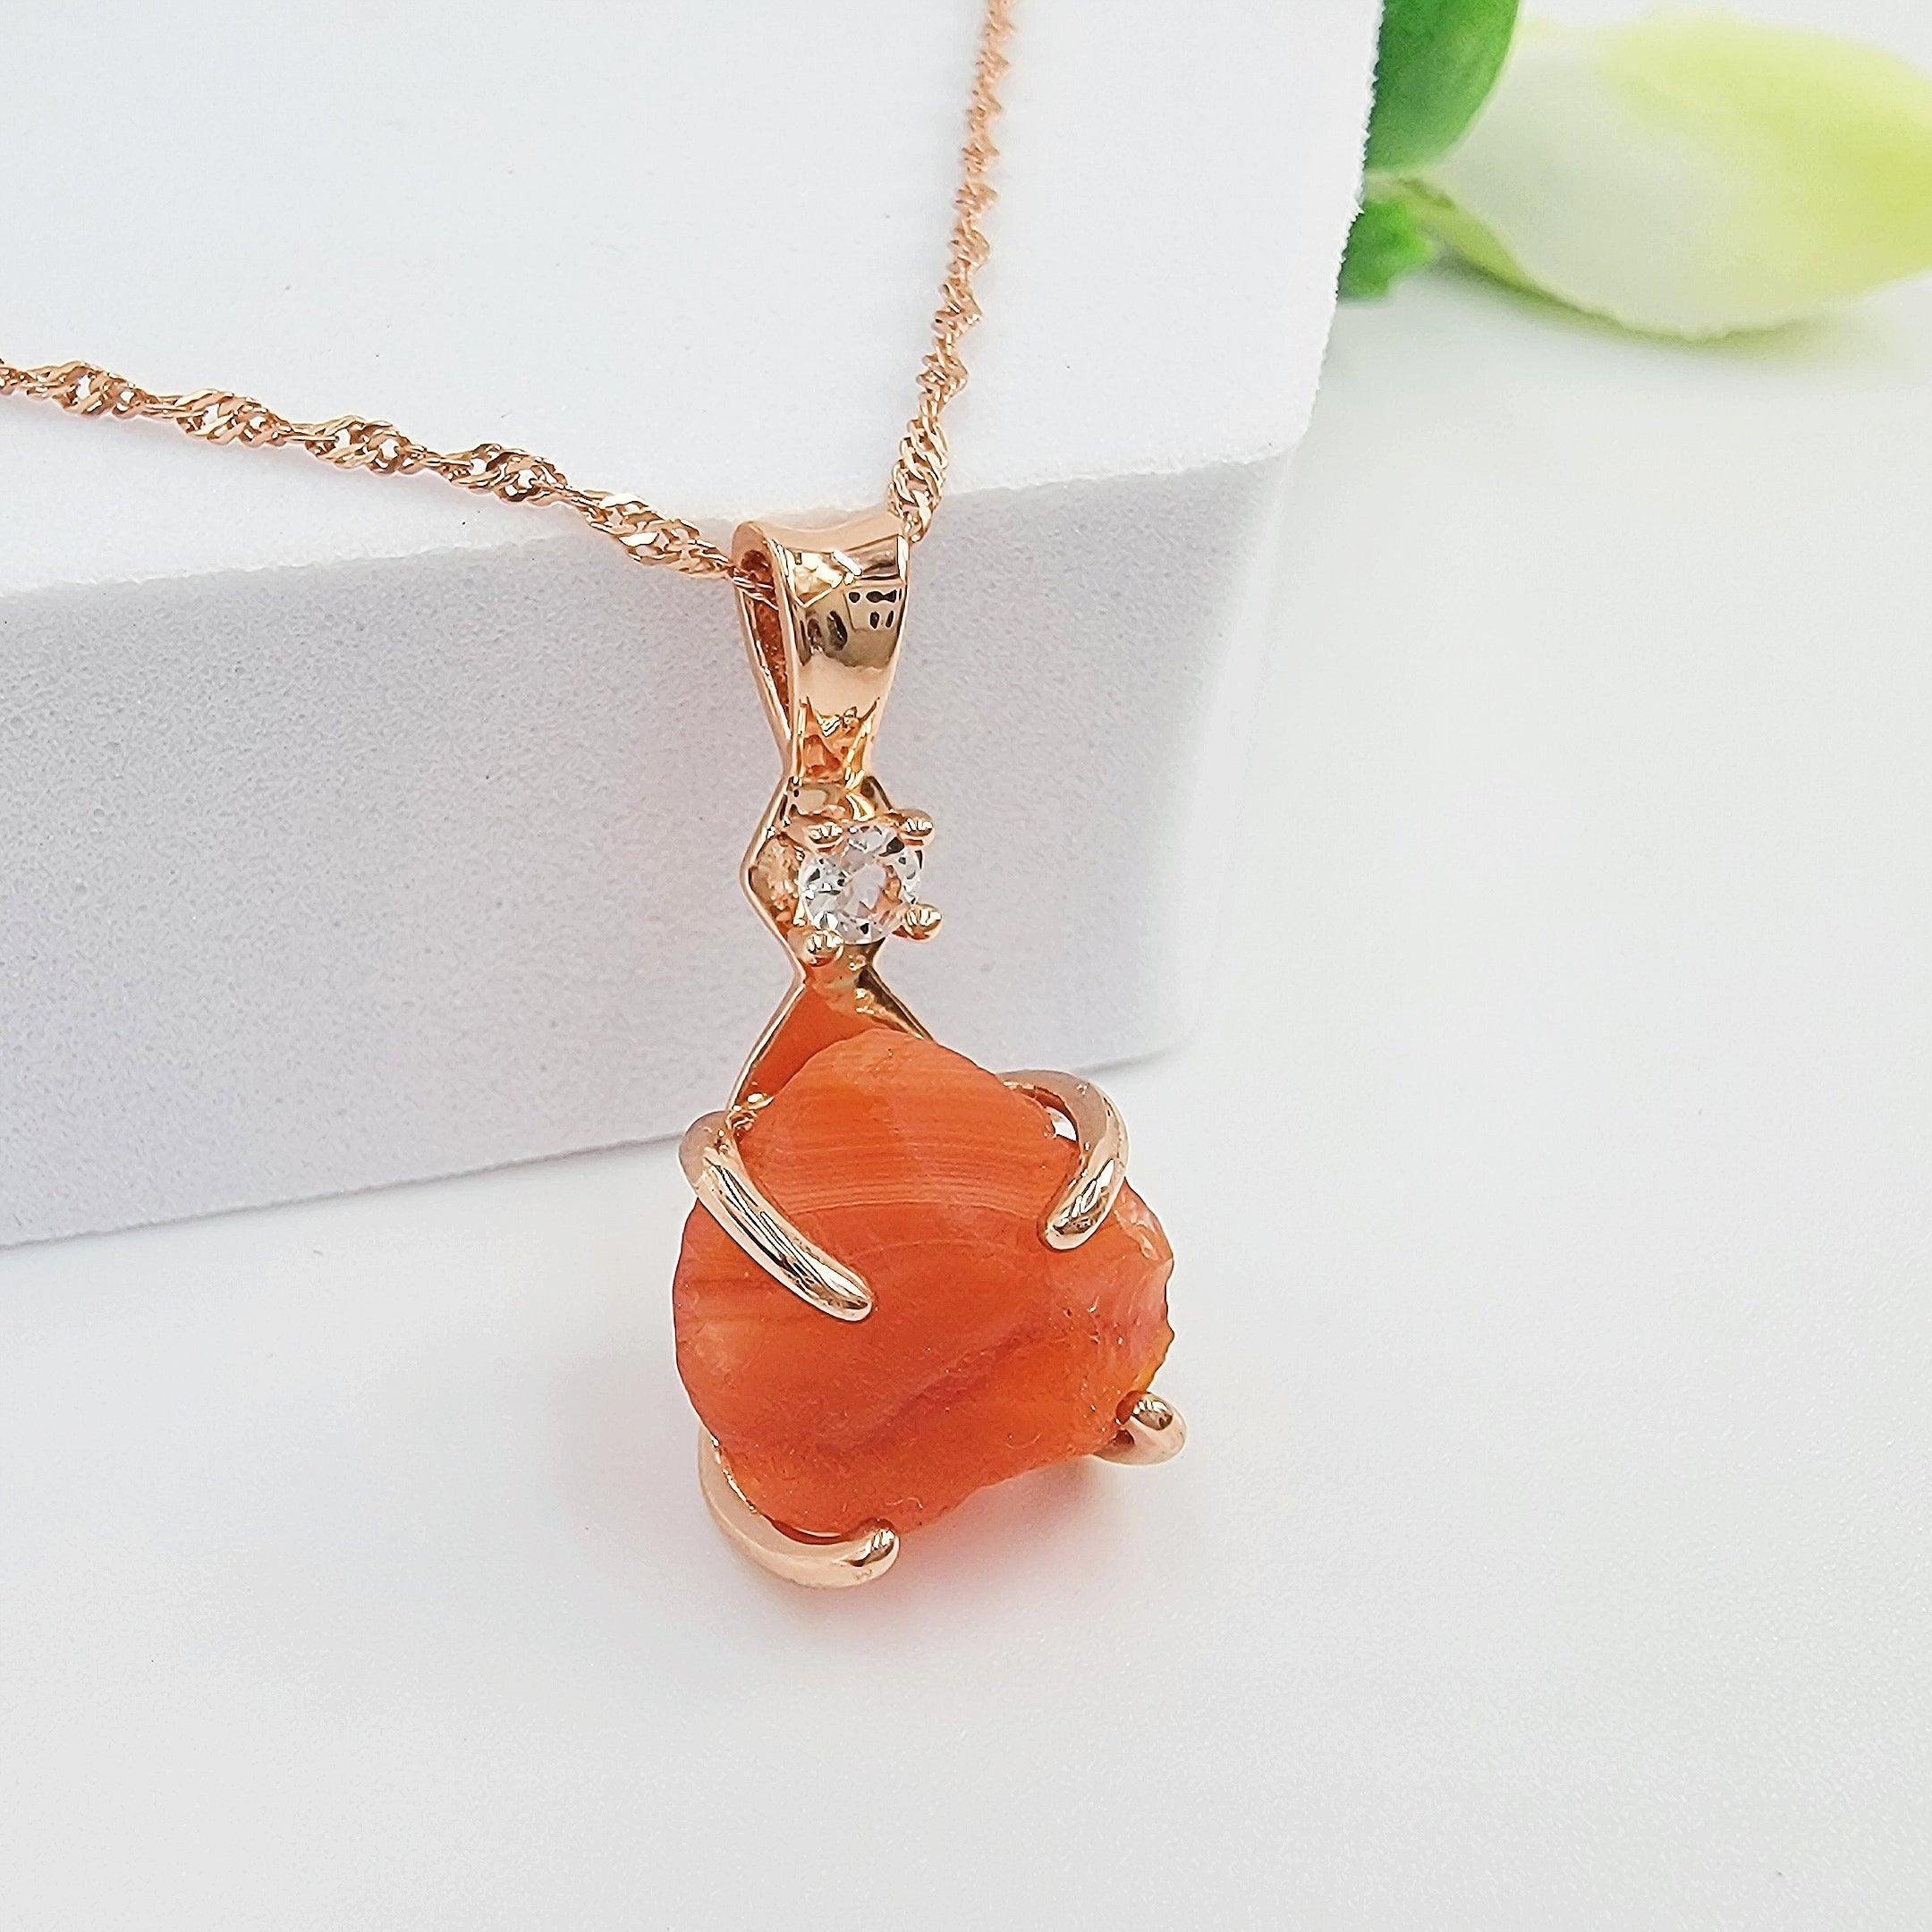 Carnelian chips crystal Necklace